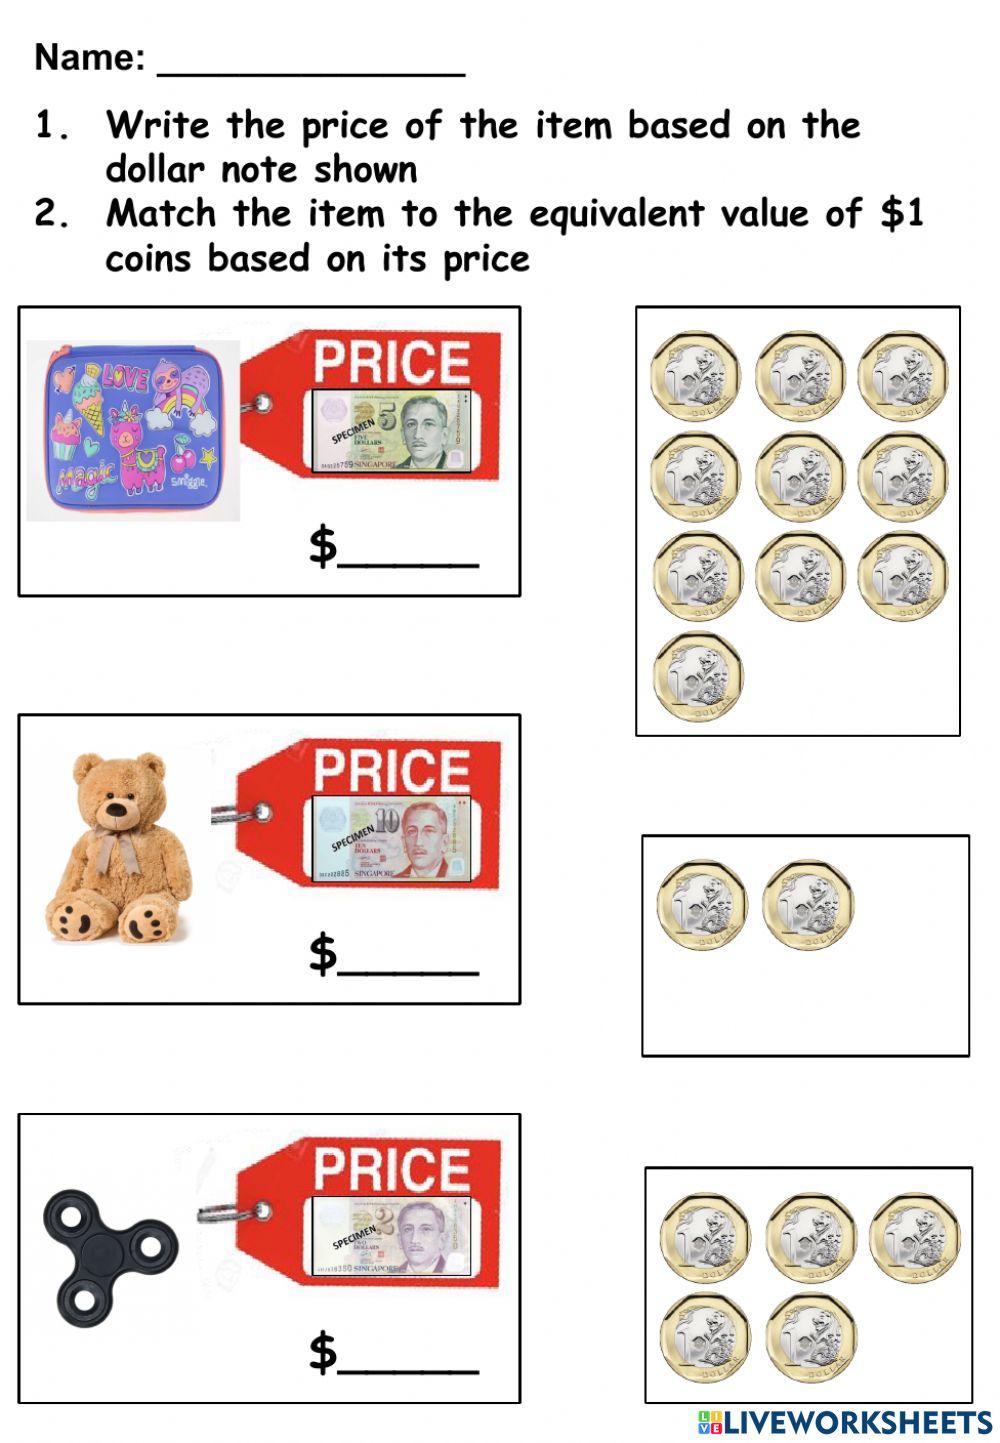 Dollar notes and equivalent group of -1 coins